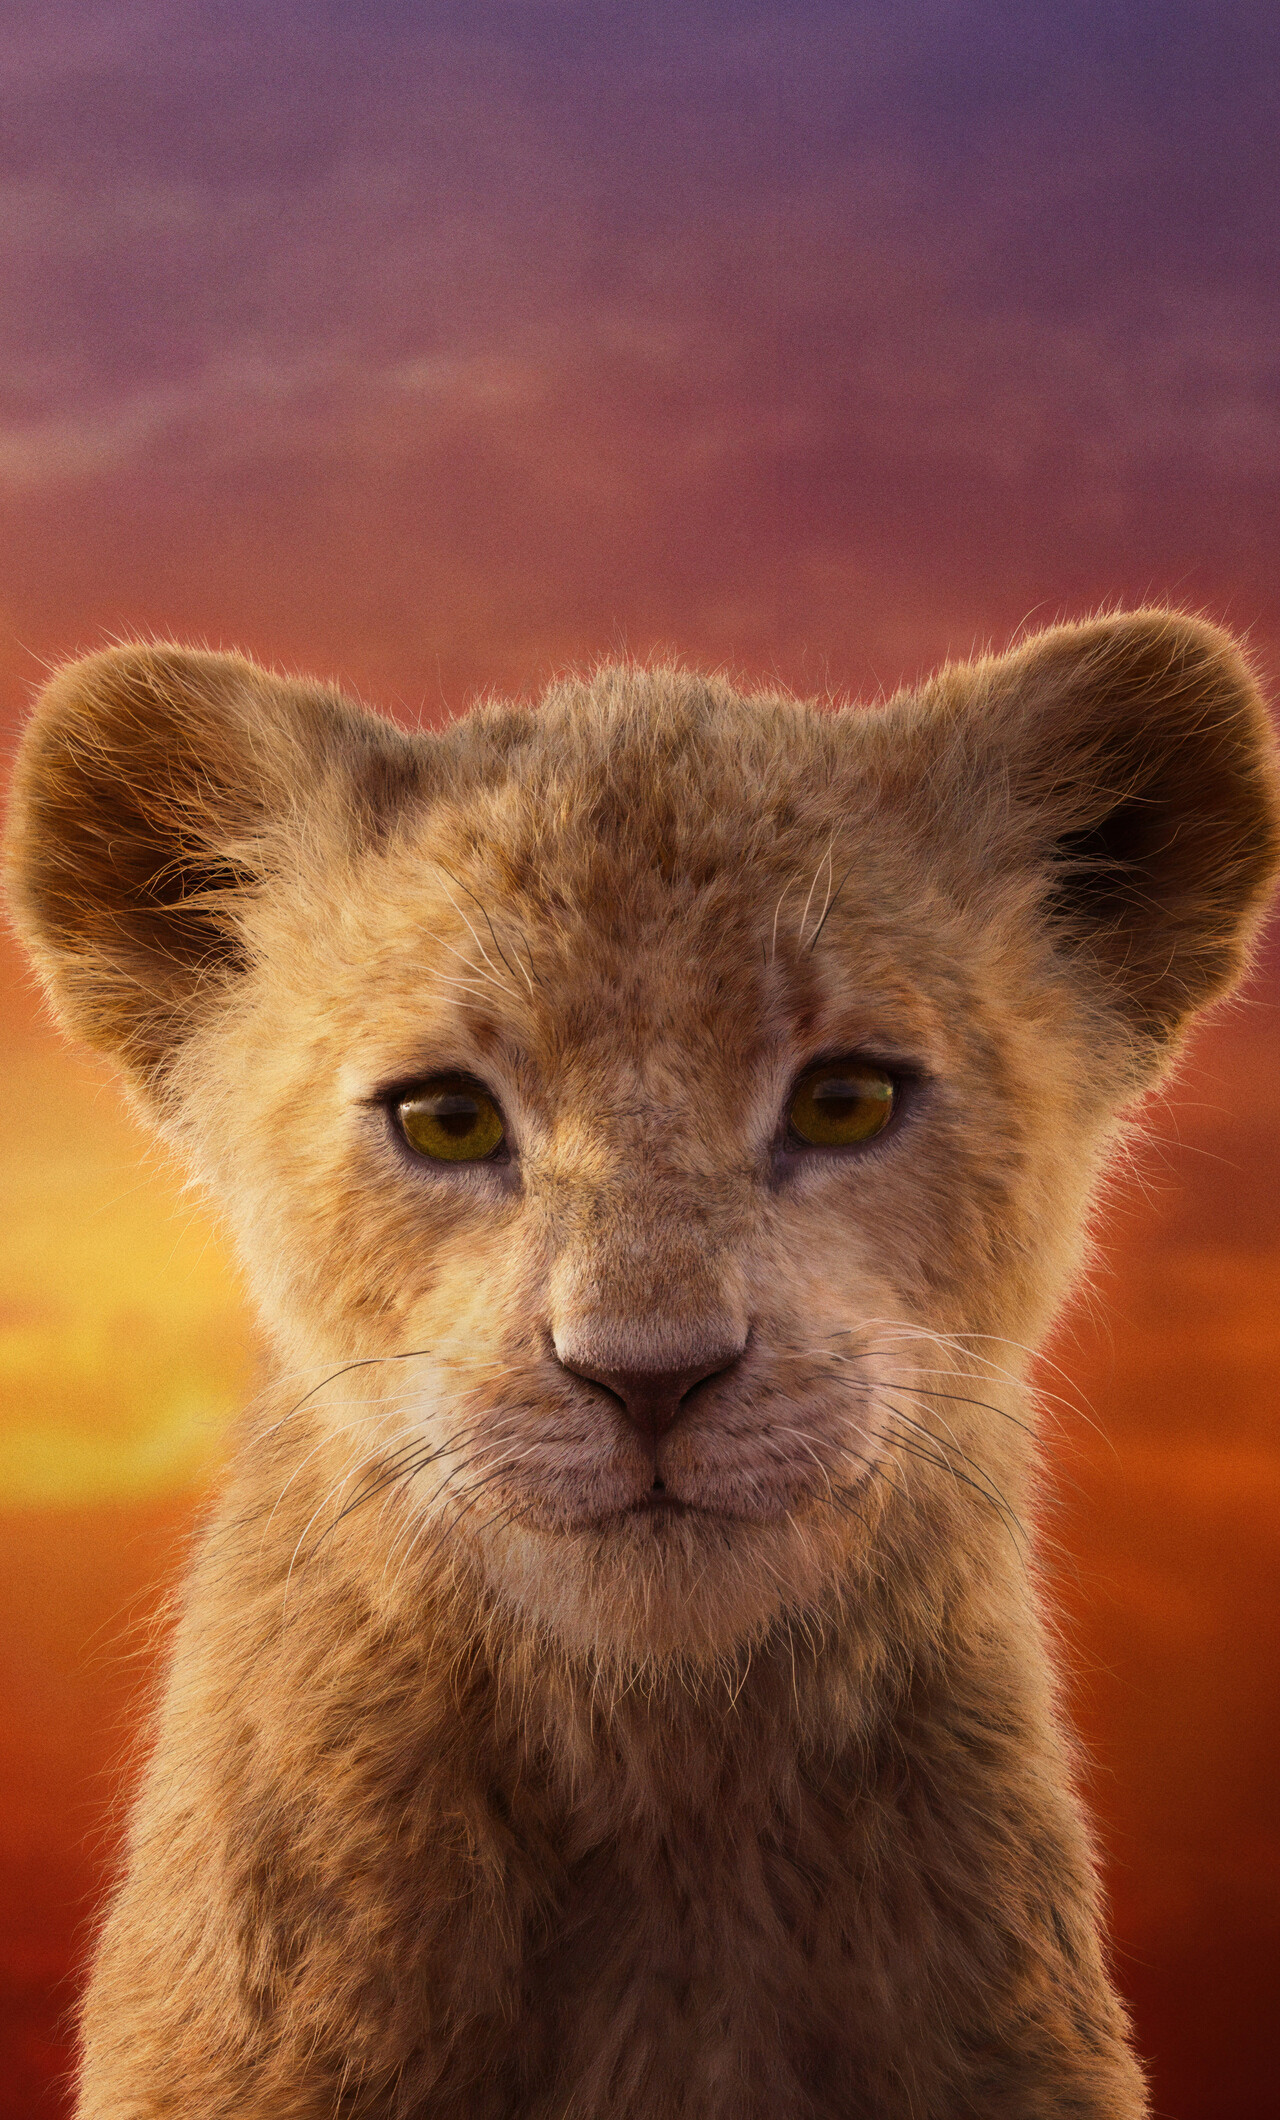 The Lion King: The son of Mufasa and the right heir to rule the Pride Lands, Simba. 1280x2120 HD Background.